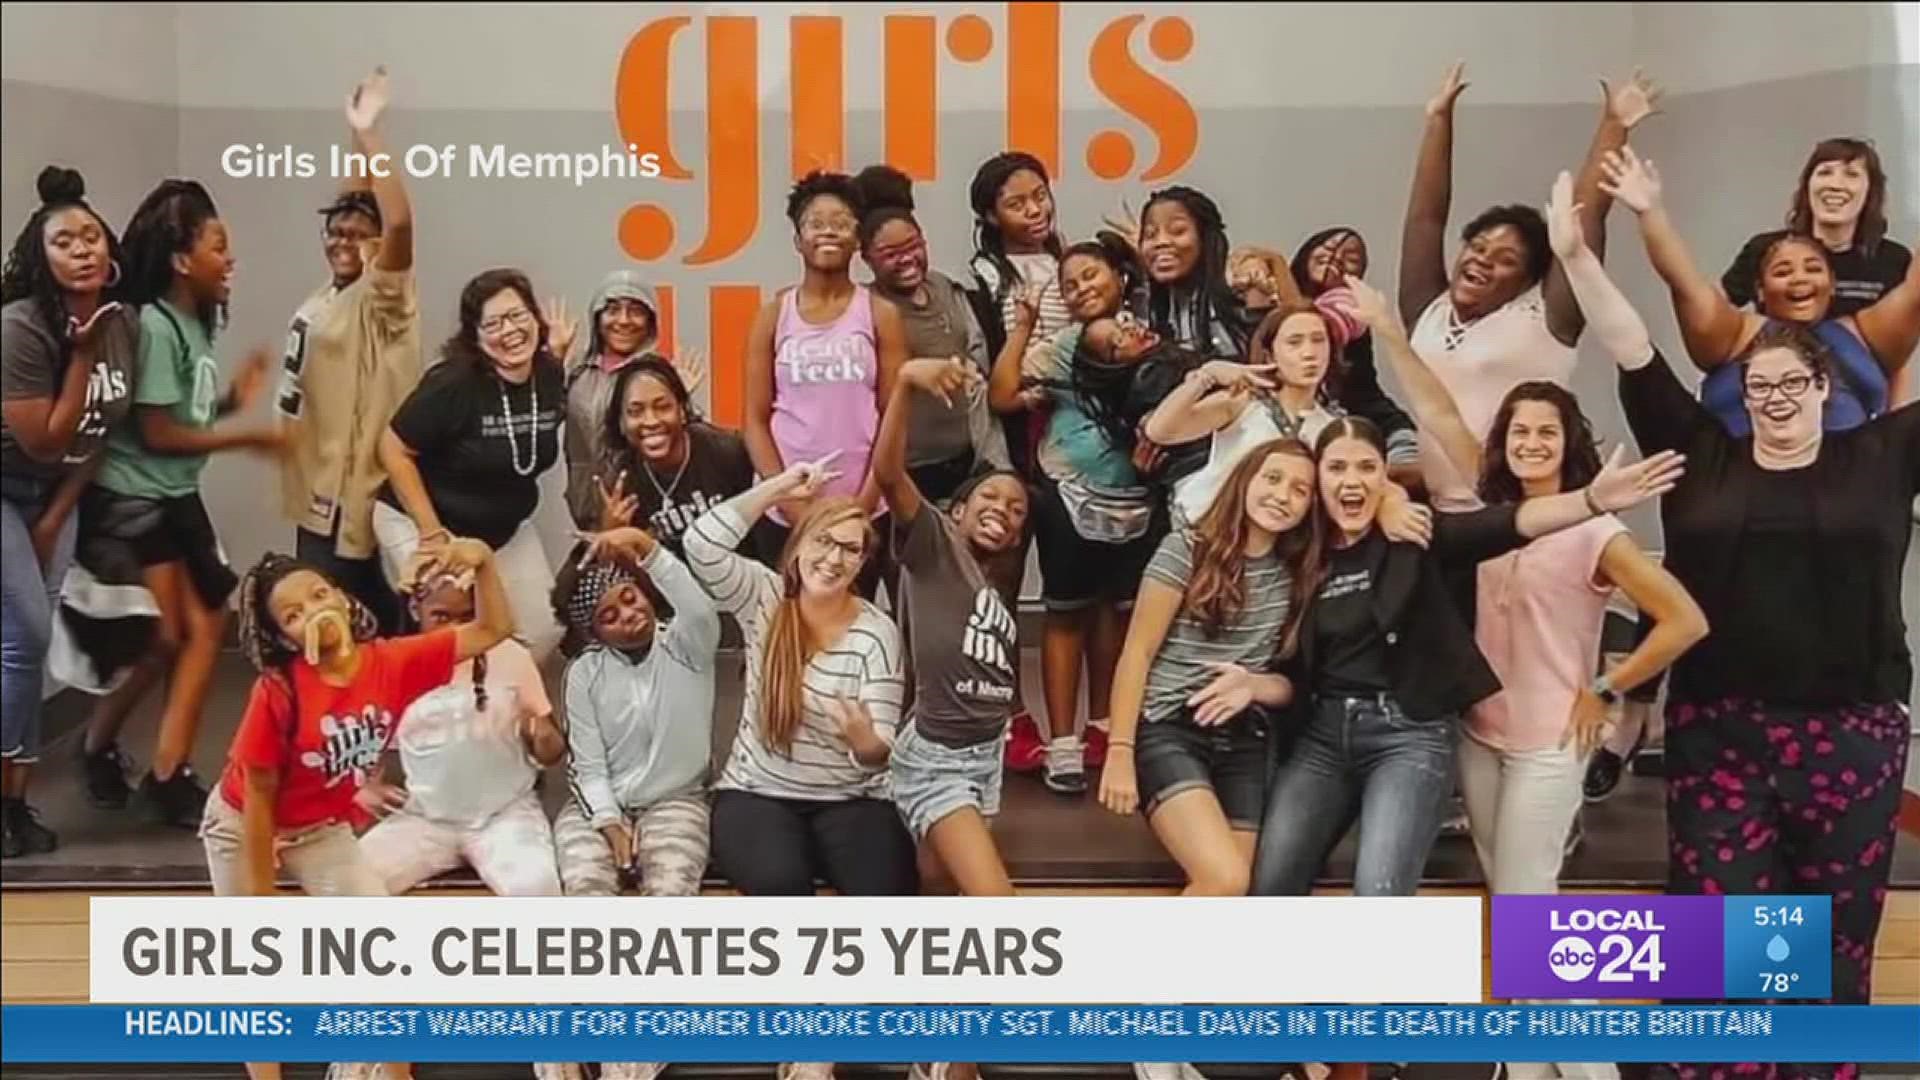 Girls Inc. of Memphis was founded in 1946 by Lucille DeVore Tucker